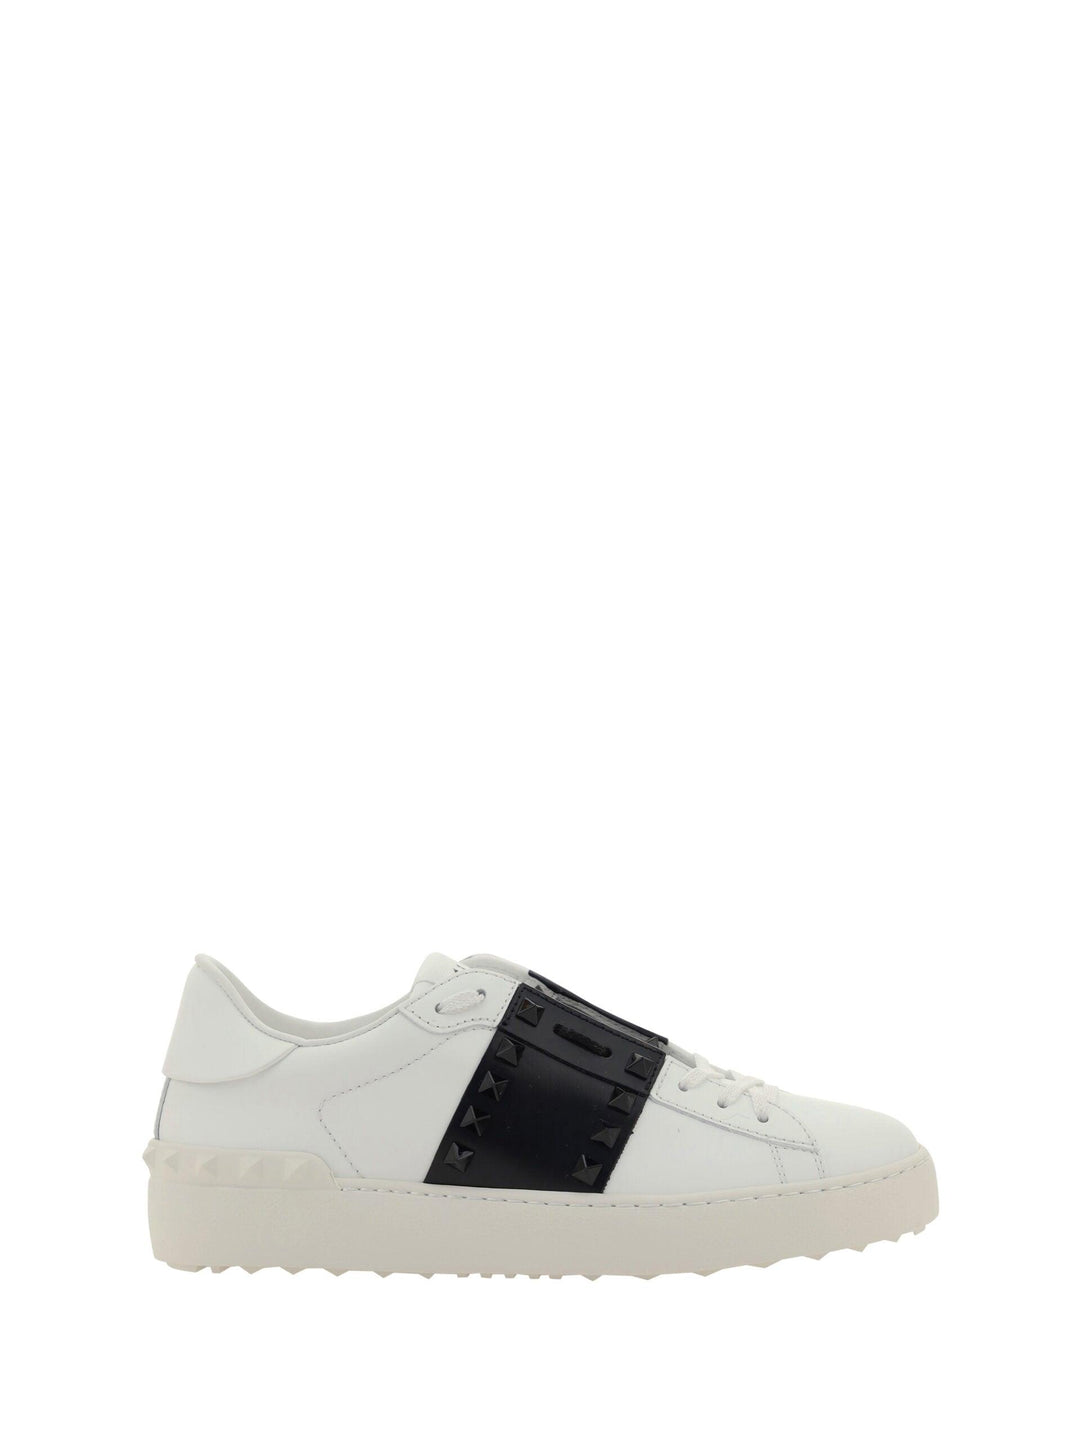 Valentino White and Black Calf Leather Sneakers - Ellie Belle